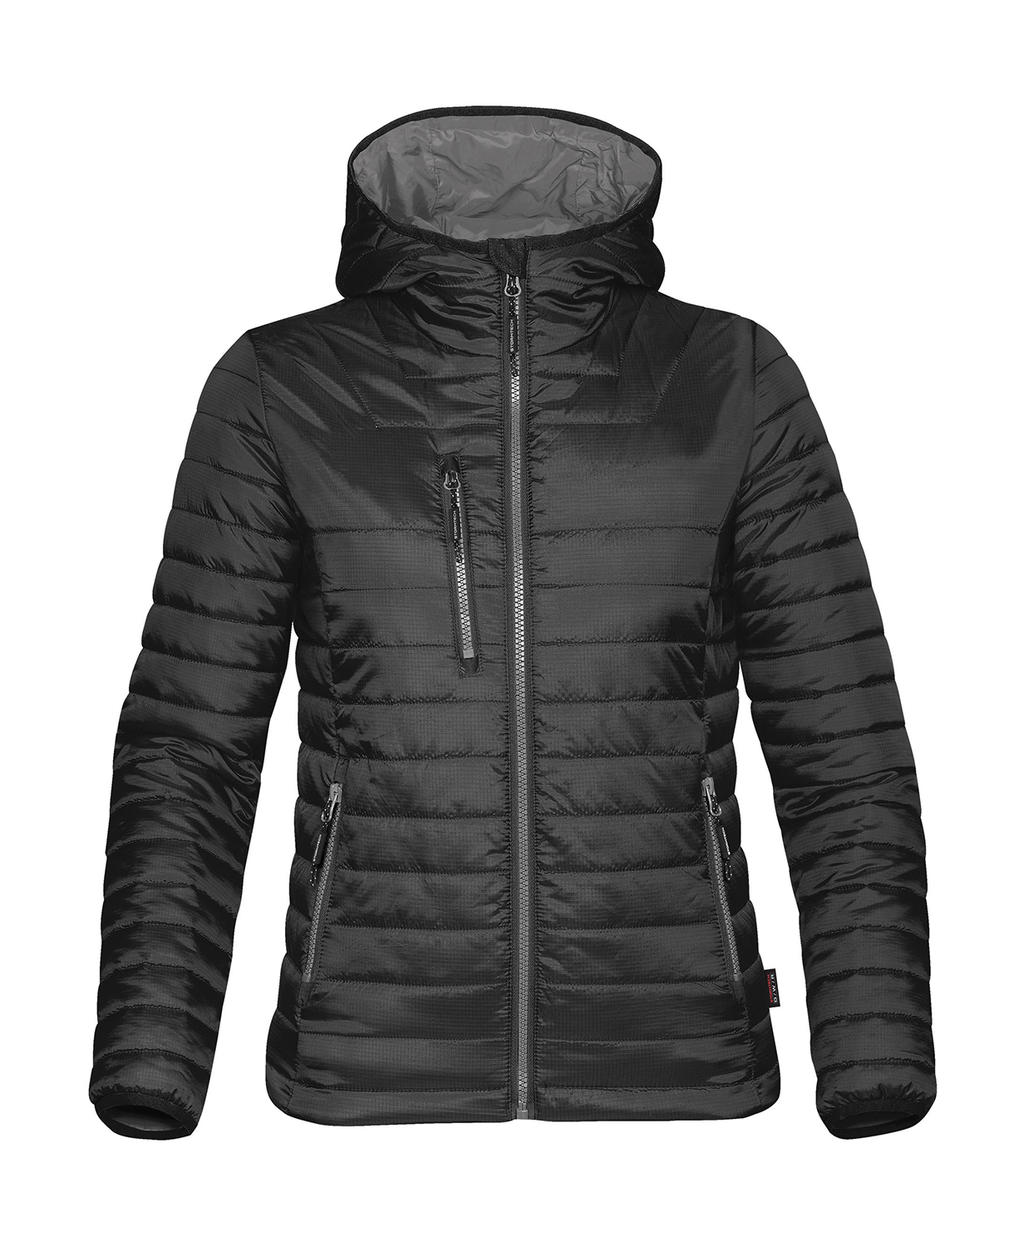  Womens Gravity Thermal Jacket in Farbe Black/Charcoal